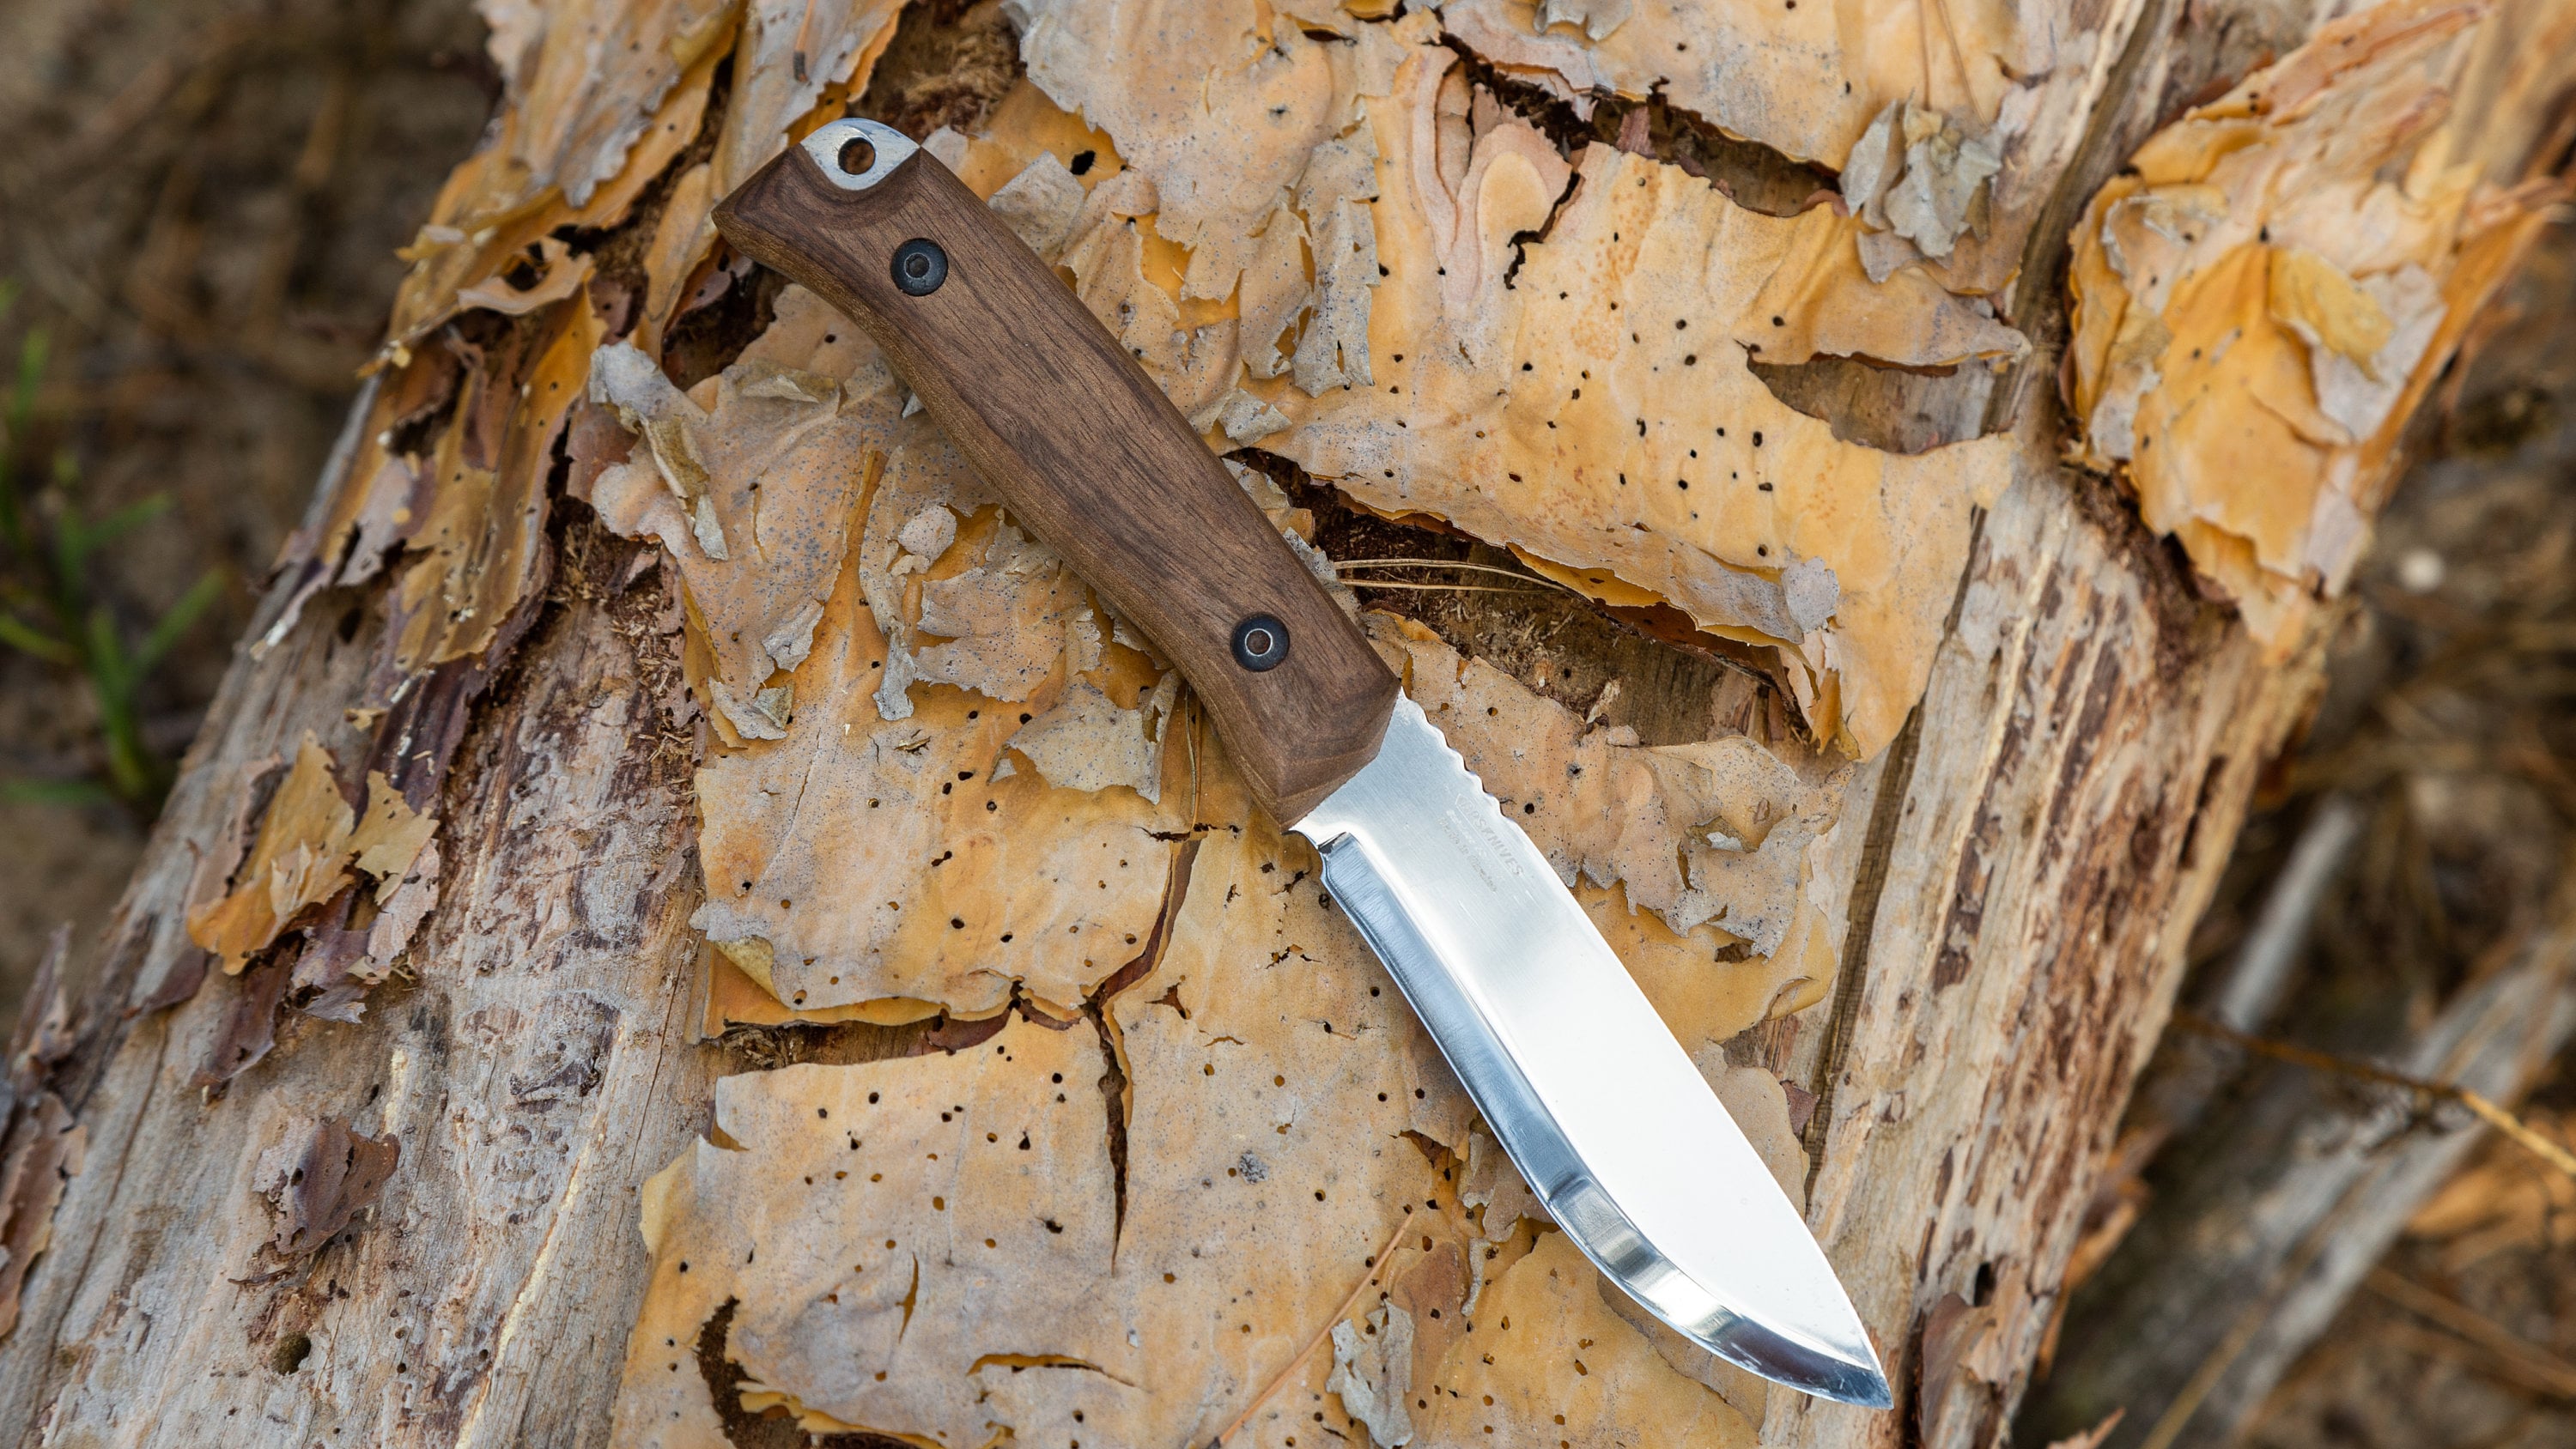 SHHM Leather sheath — High quality handmade camping knives — BPS